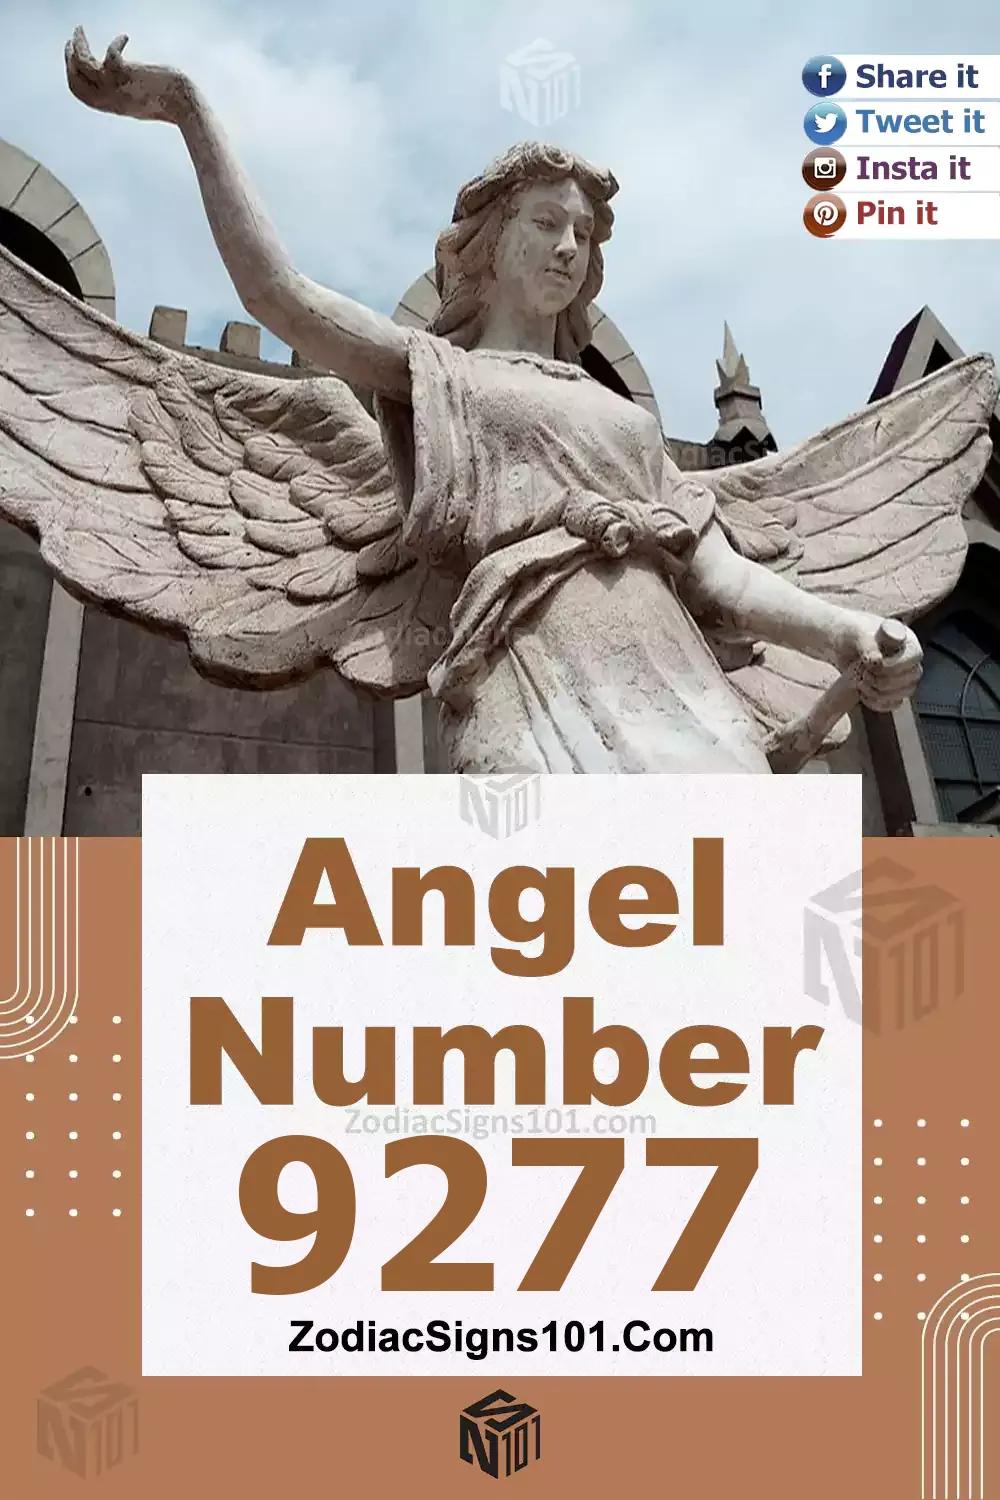 9277 Angel Number Meaning